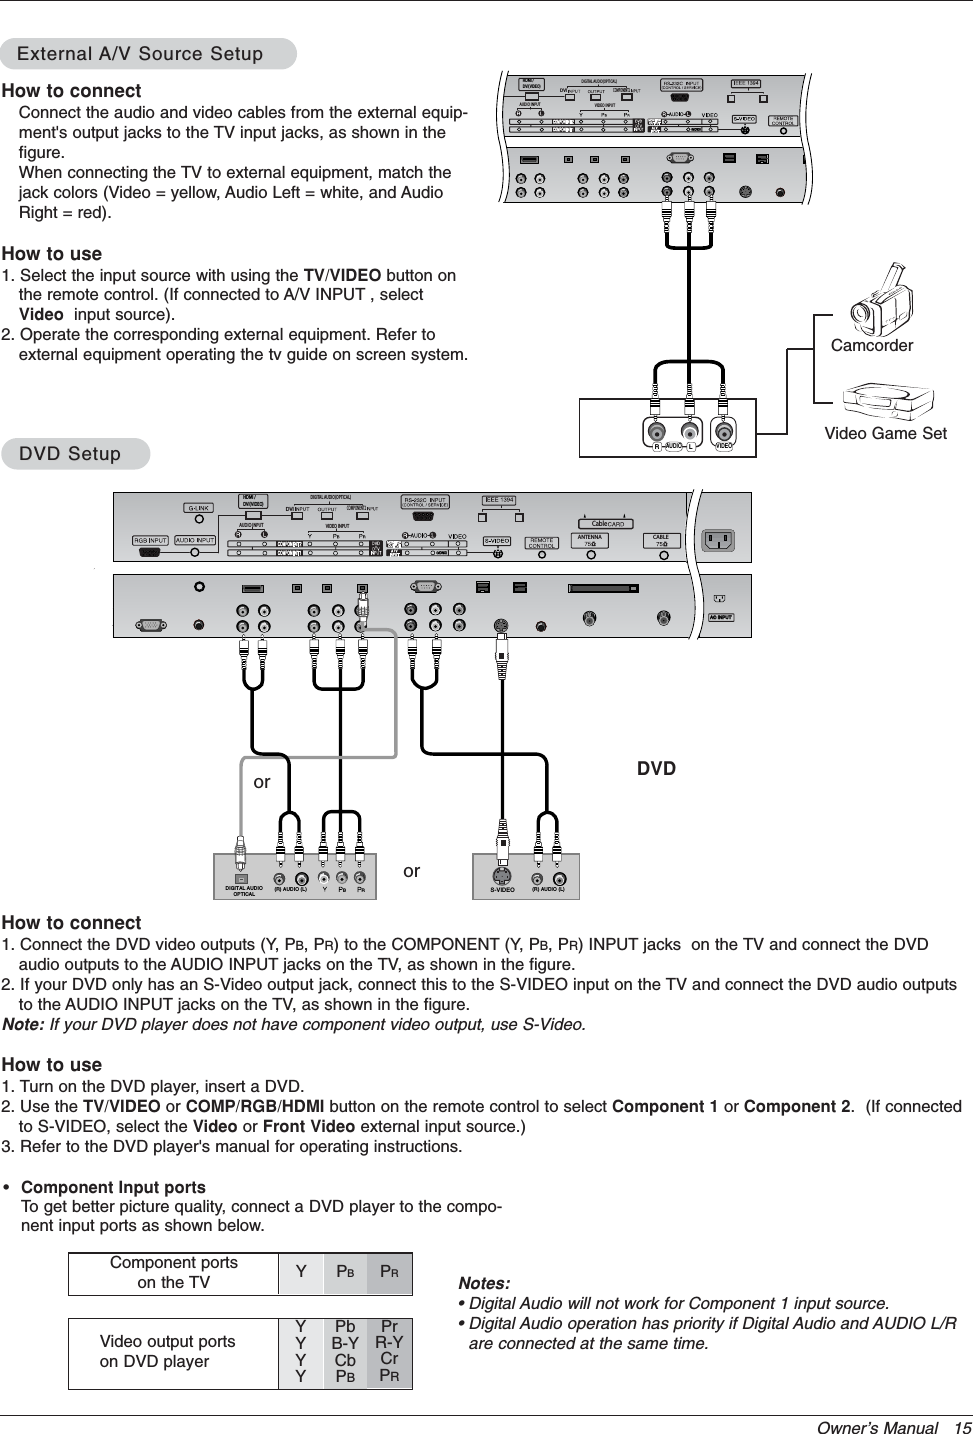 Owner’s Manual   15•Component Input portsTo get better picture quality, connect a DVD player to the compo-nent input ports as shown below.How to connectConnect the audio and video cables from the external equip-ment&apos;s output jacks to the TV input jacks, as shown in thefigure.When connecting the TV to external equipment, match thejack colors (Video = yellow, Audio Left = white, and AudioRight = red).How to use1. Select the input source with using the TV/VIDEO button onthe remote control. (If connected to A/V INPUT , selectVideo  input source).2. Operate the corresponding external equipment. Refer toexternal equipment operating the tv guide on screen system.Component ports on the TV YPBPRVideo output ports on DVD playerYYYYPbB-YCbPBPrR-YCrPRHow to connect1. Connect the DVD video outputs (Y, PB, PR) to the COMPONENT (Y, PB, PR) INPUT jacks  on the TV and connect the DVDaudio outputs to the AUDIO INPUT jacks on the TV, as shown in the figure.2. If your DVD only has an S-Video output jack, connect this to the S-VIDEO input on the TV and connect the DVD audio outputsto the AUDIO INPUT jacks on the TV, as shown in the figure.Note: If your DVD player does not have component video output, use S-Video.How to use1. Turn on the DVD player, insert a DVD.2. Use the TV/VIDEO or COMP/RGB/HDMI button on the remote control to select Component 1 or Component 2.  (If connectedto S-VIDEO, select the Video or Front Video external input source.)3. Refer to the DVD player&apos;s manual for operating instructions.ExternalExternal A/V Source SetupA/V Source SetupDVD SetupDVD SetupCABLECableANTENNAAC INPUTRLAUDIO VIDEODVICOMPONENT2DIGITAL AUDIO(OPTICAL)VIDEO INPUTAUDIO INPUTHDMI /DVI(VIDEO)AC INPUTAC INPUTBR(R) AUDIO (L)DIGITAL AUDIOOPTICAL (R) AUDIO (L)S-VIDEOCABLECableANTENNADVICOMPONENT2DIGITAL AUDIO(OPTICAL)VIDEO INPUTAUDIO INPUTHDMI /DVI(VIDEO)DVDorCamcorderVideo Game SetNotes:• Digital Audio will not work for Component 1 input source.• Digital Audio operation has priority if Digital Audio and AUDIO L/Rare connected at the same time.or